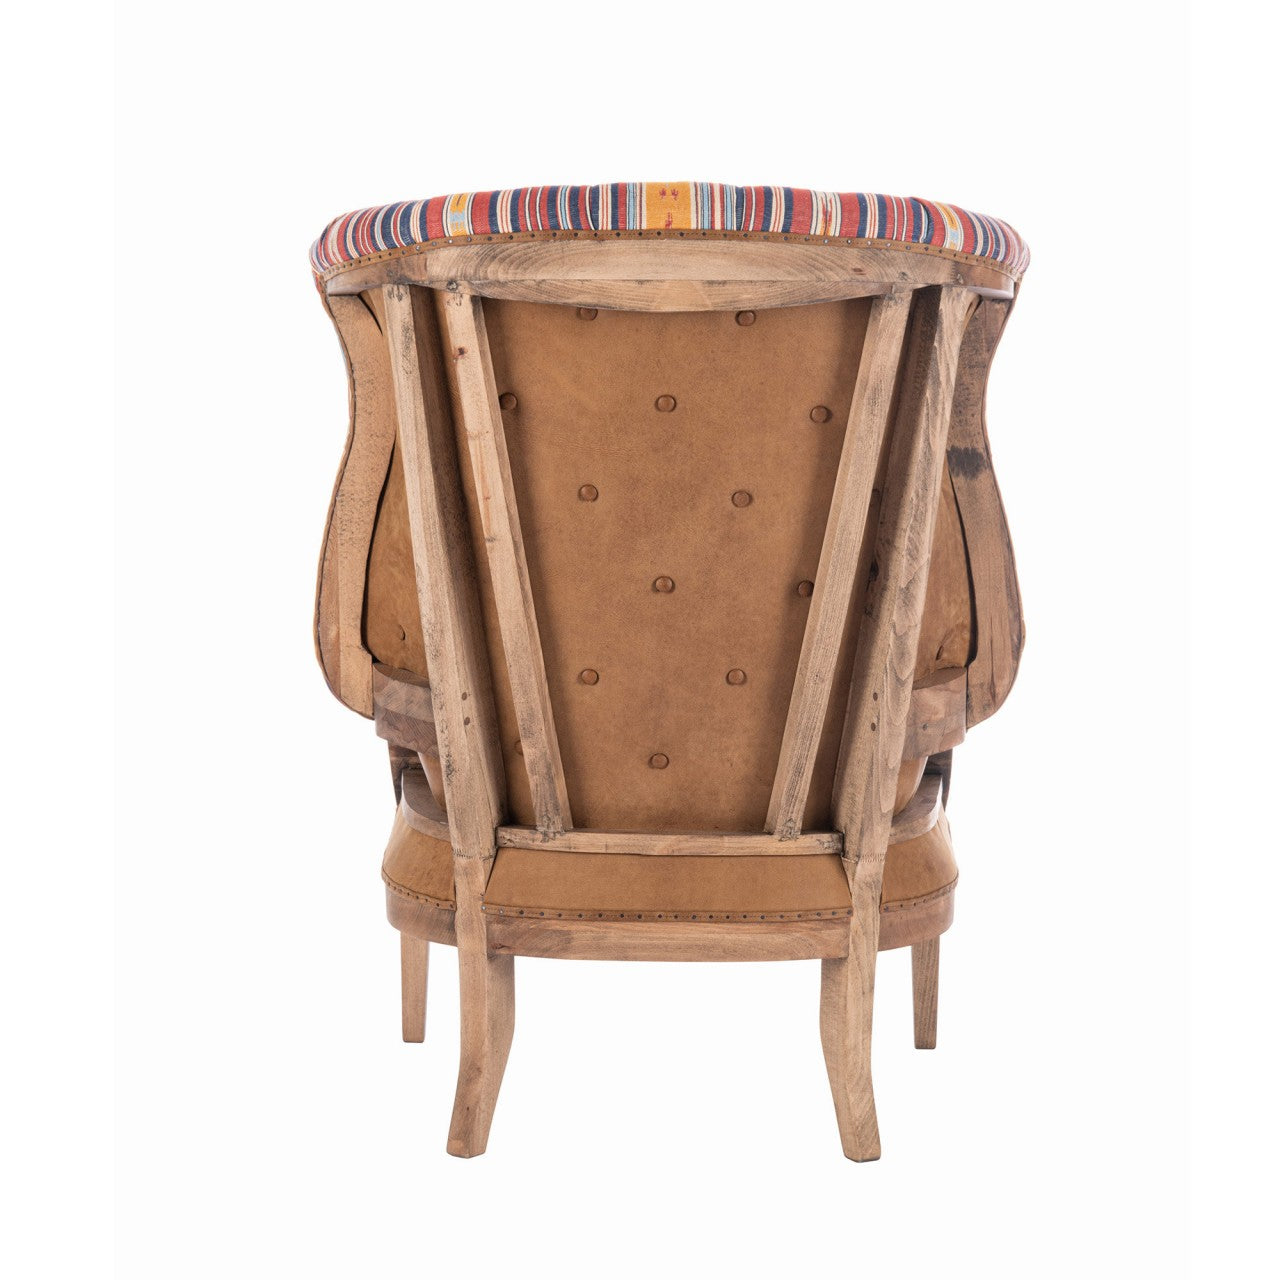 WILLIAM DECONSTRUCTED WING CHAIR (Leather seat cushion) - NEYSHABOUR Woven Fabric_Furniture_Mindthegap